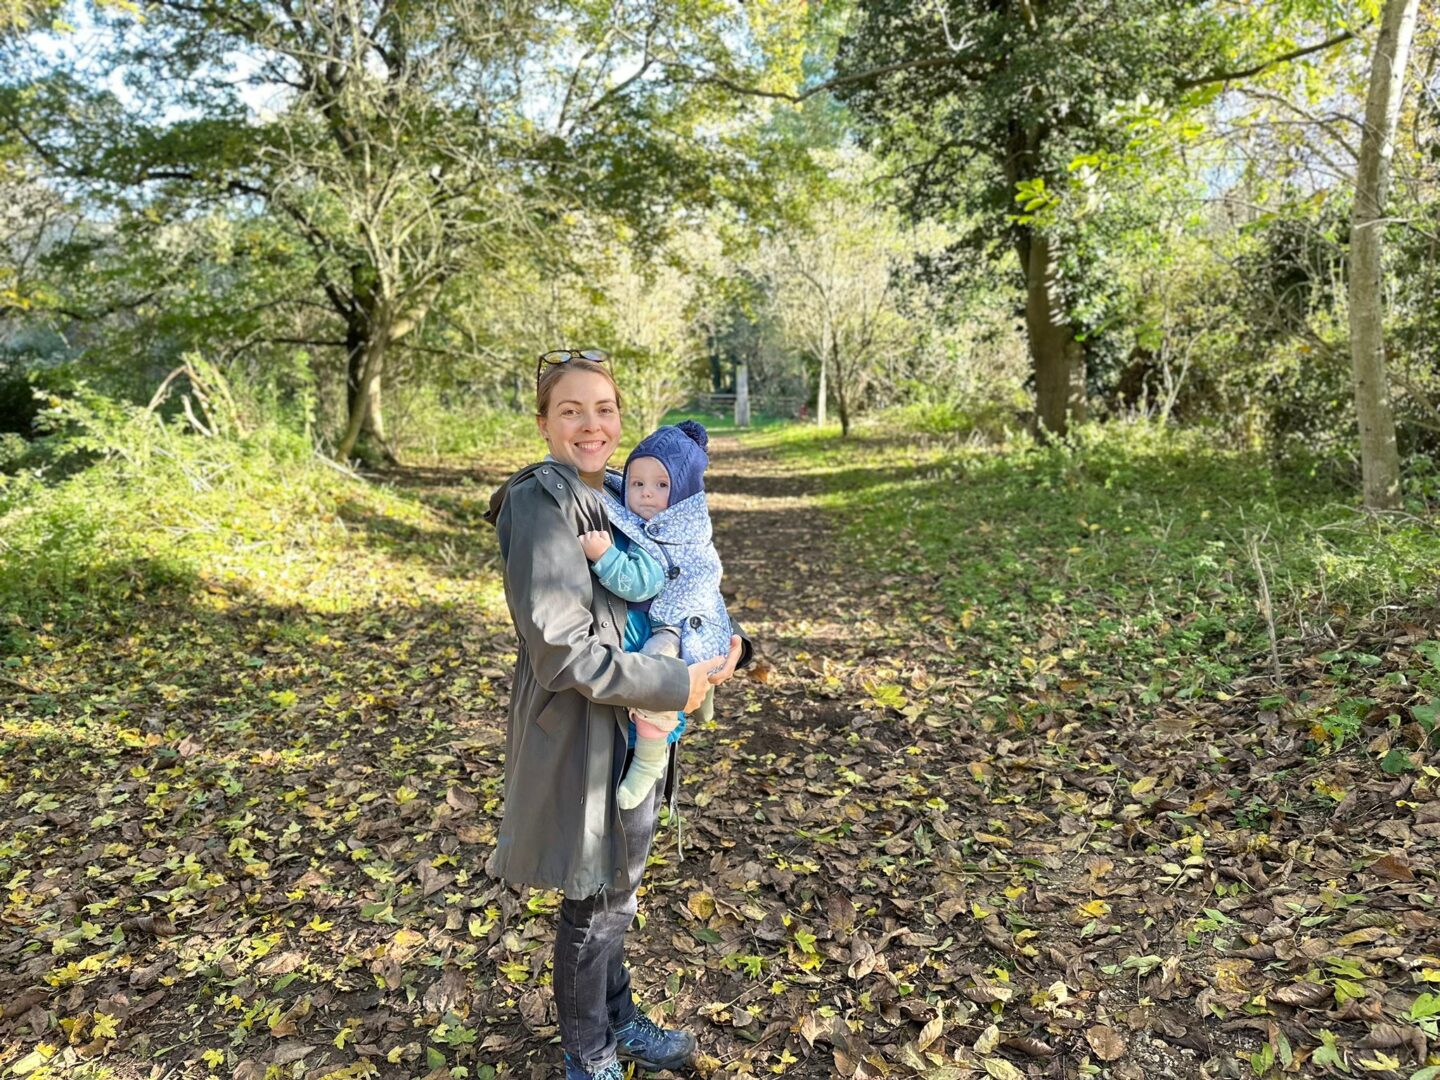 woman in green coat is carrying a baby in a sling. she is smiling at the camera and the baby is wearing a blue woolly hat. They are on a muddy path through the woods with trees behind them. 